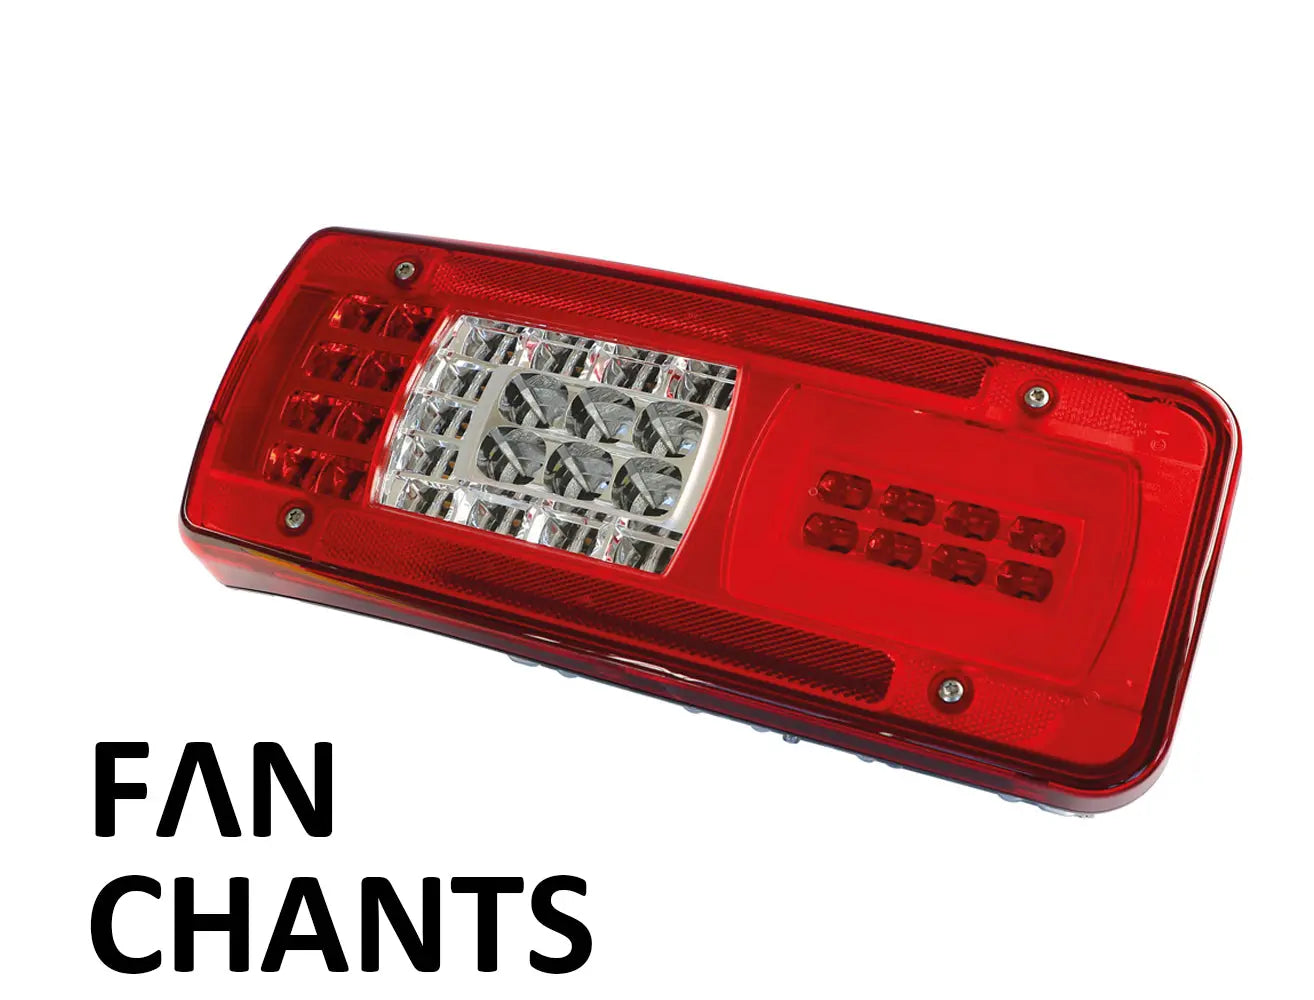 CHINA Factory Wholesale 5802062689 5802240291 Stop Light for IVECO STRALIS FANCHANTS China Auto Parts Wholesales